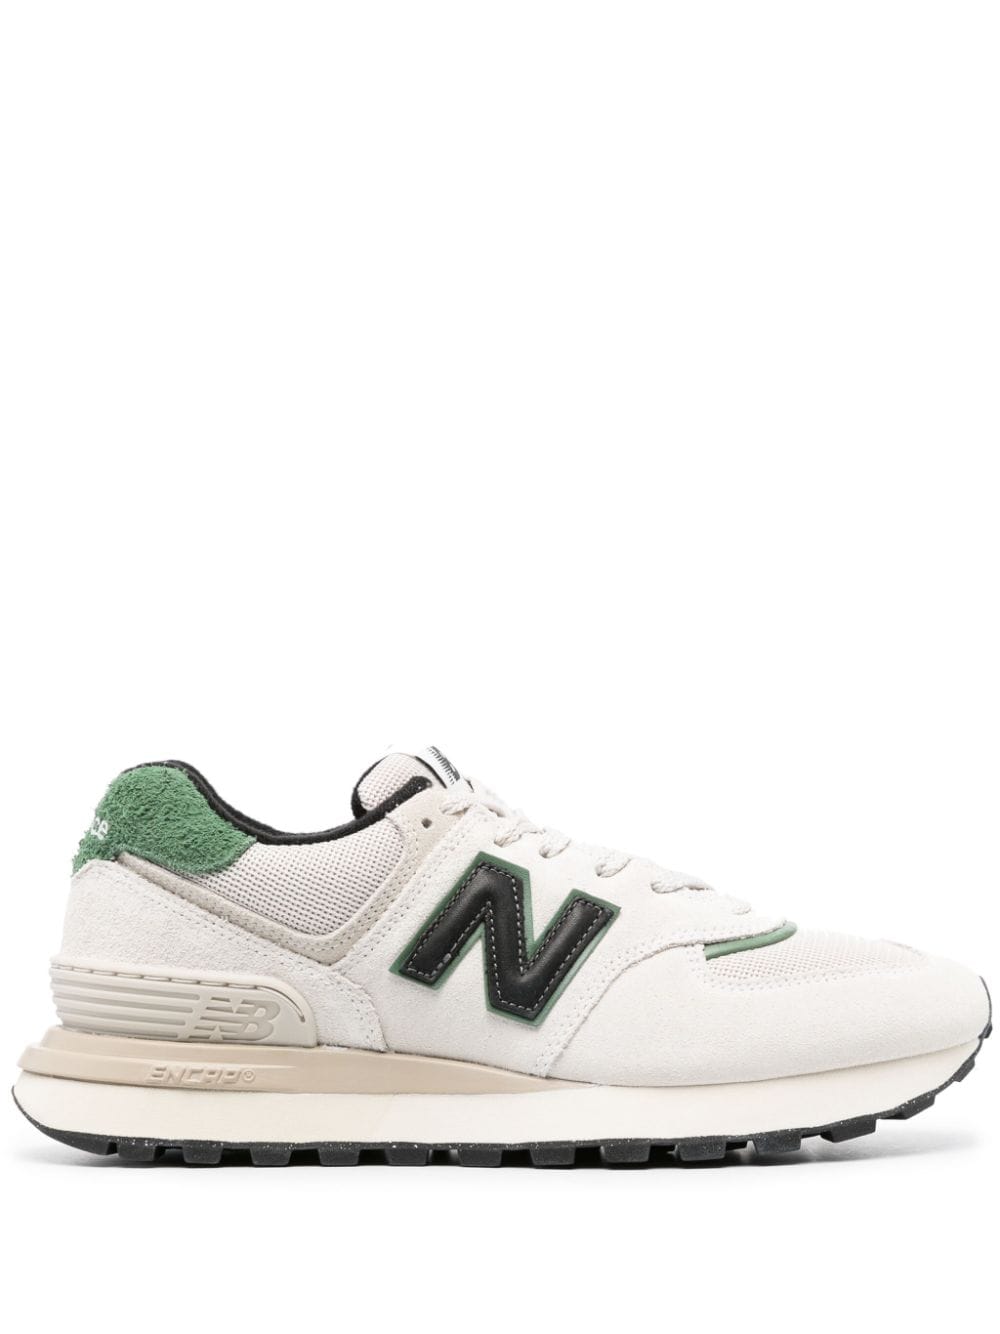 New Balance 574 suede sneakers - White